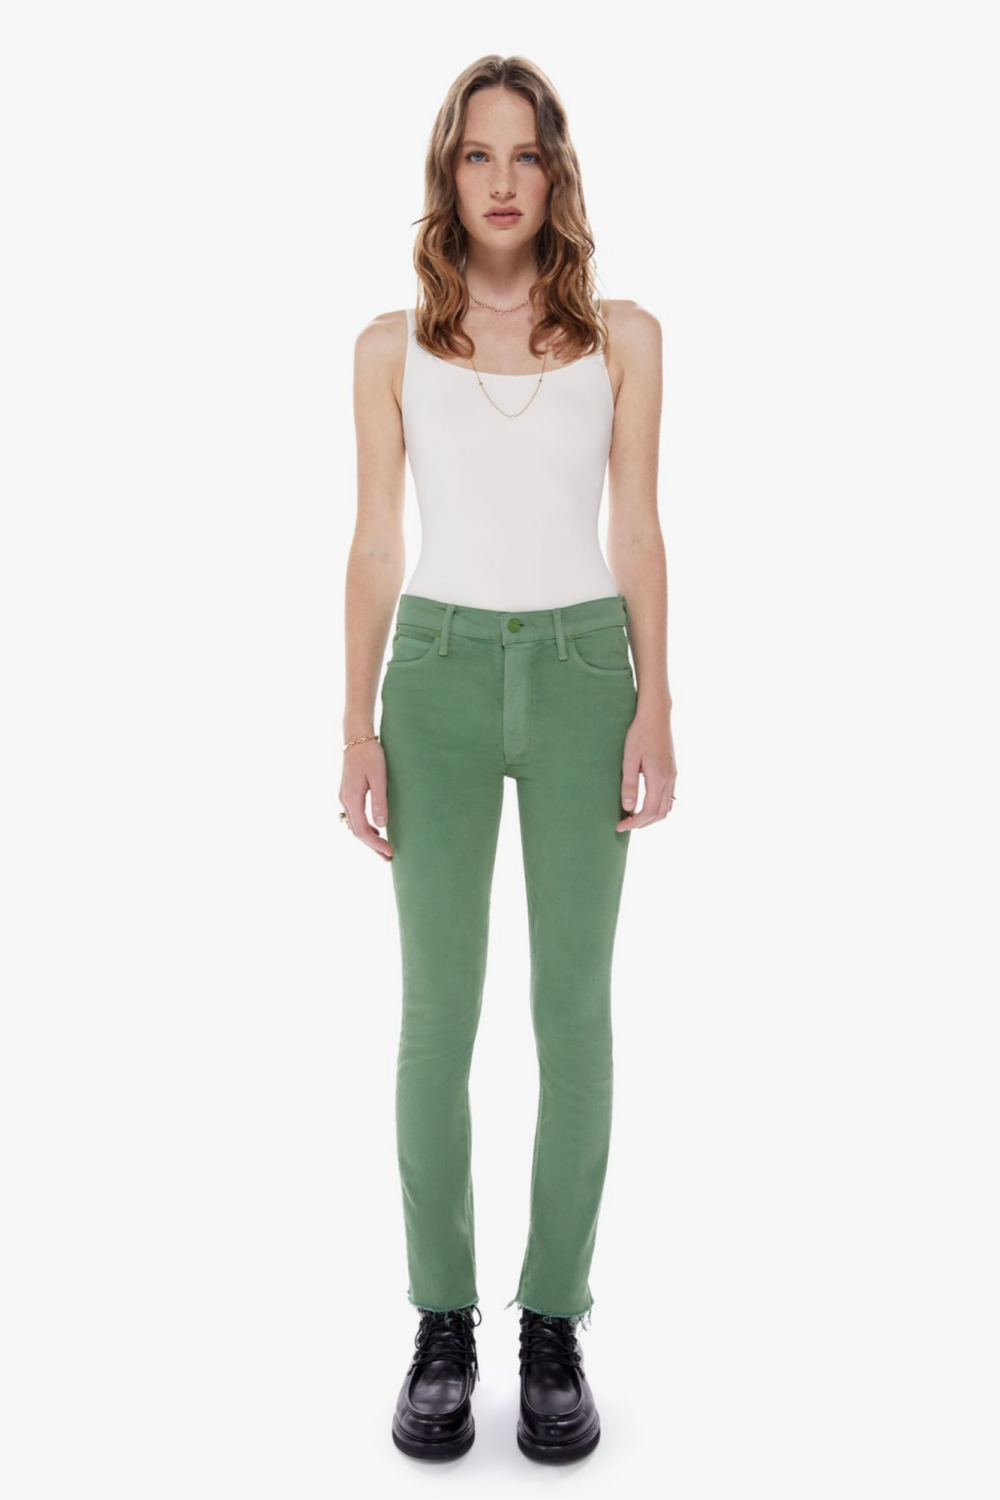 Mid Rise Dazzler Ankle Fray Pants from Mother Denim in green made in Los Angeles